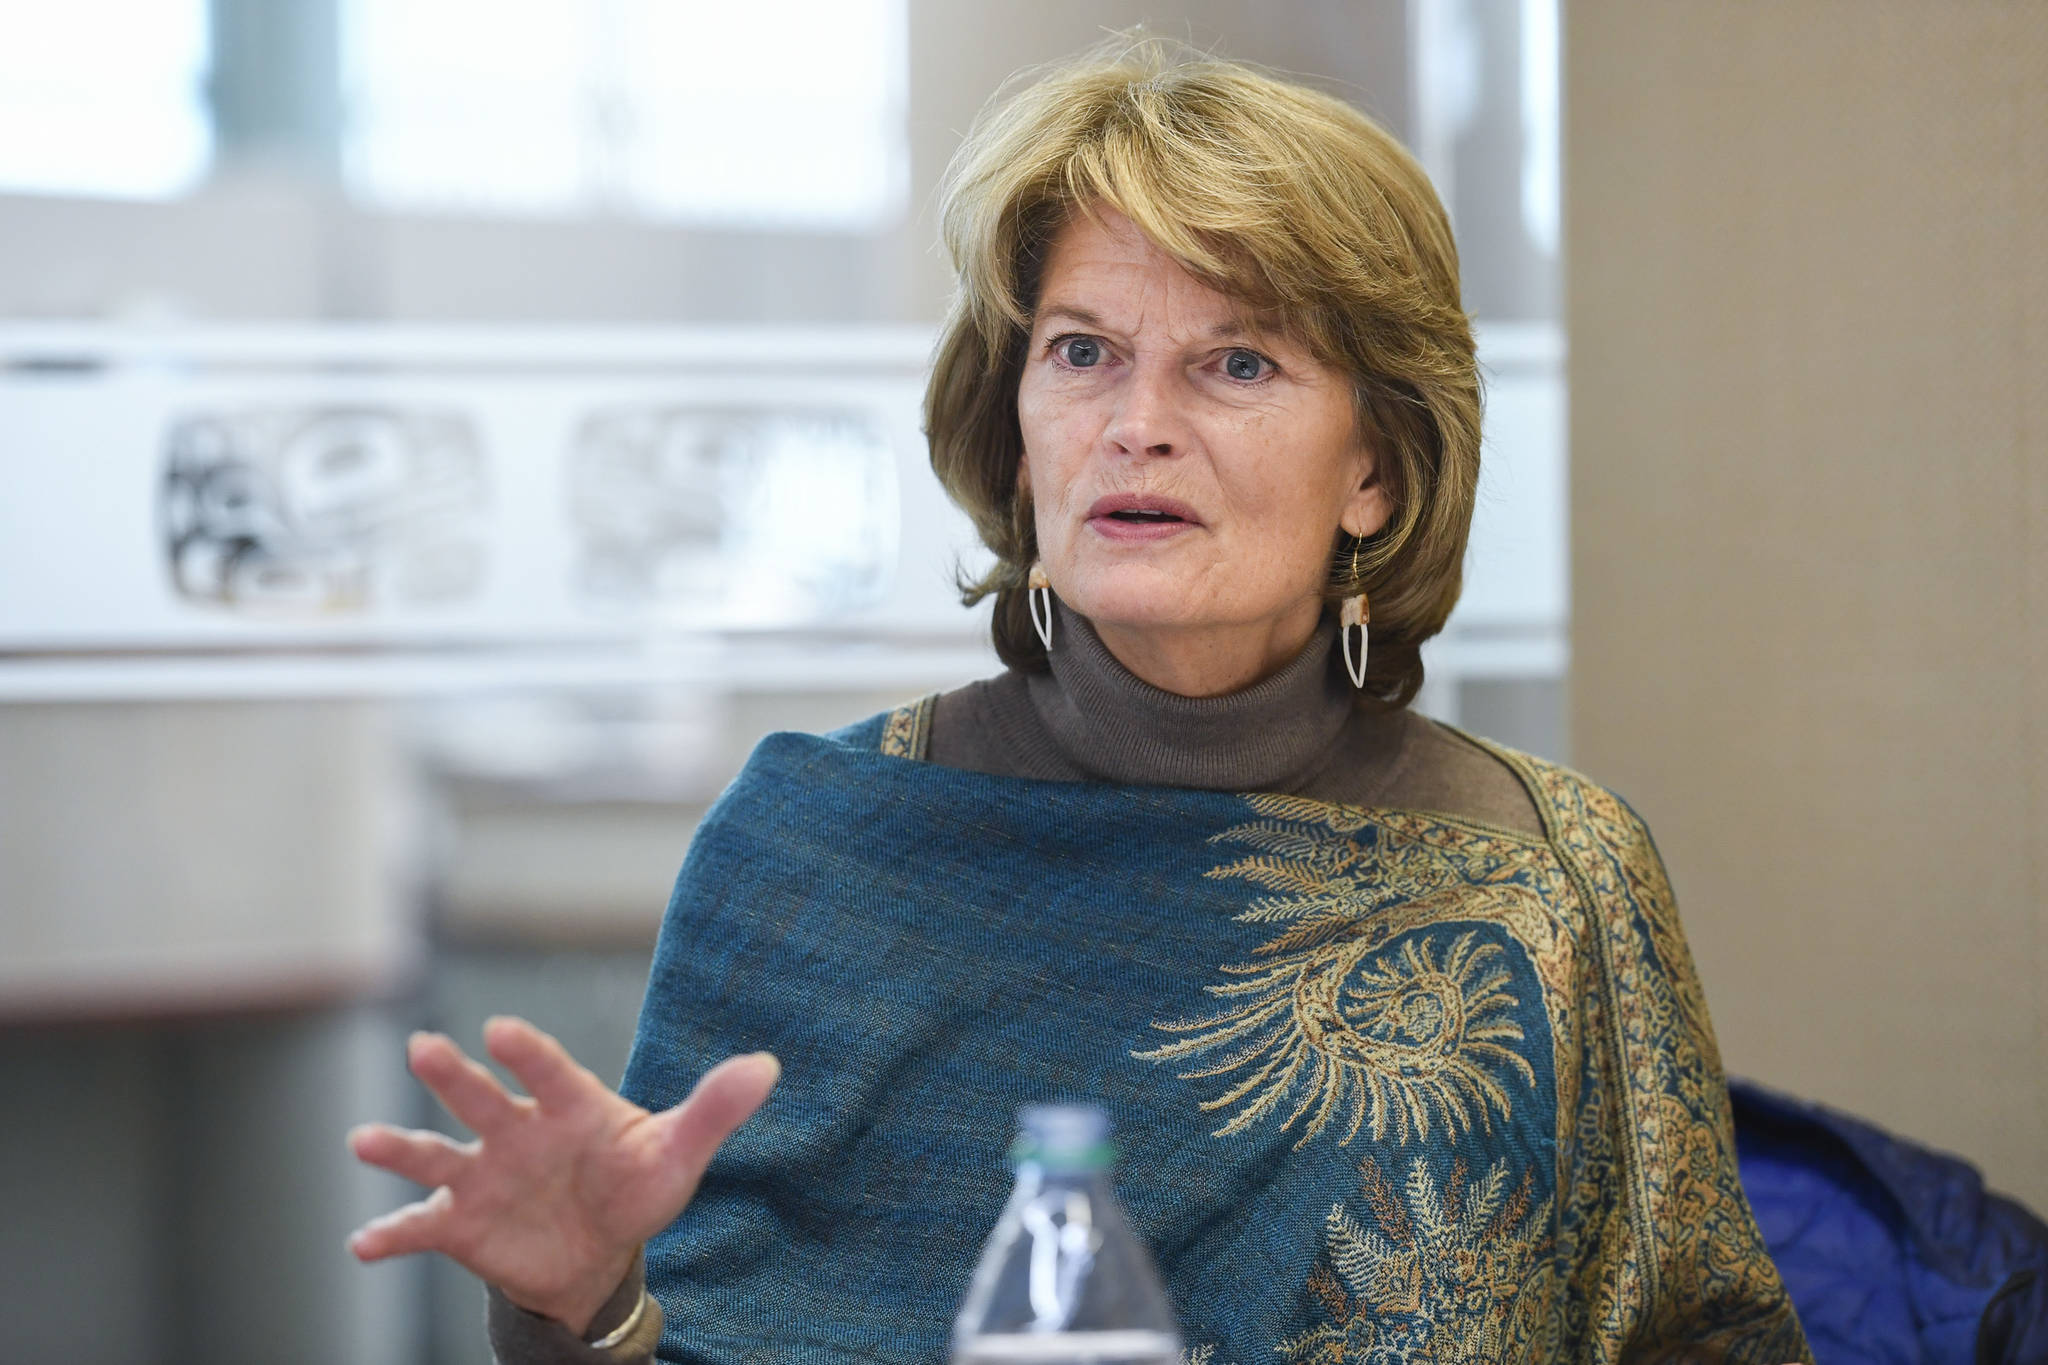 Murkowski says she’s likely to back disapproval of Trump’s emergency declaration